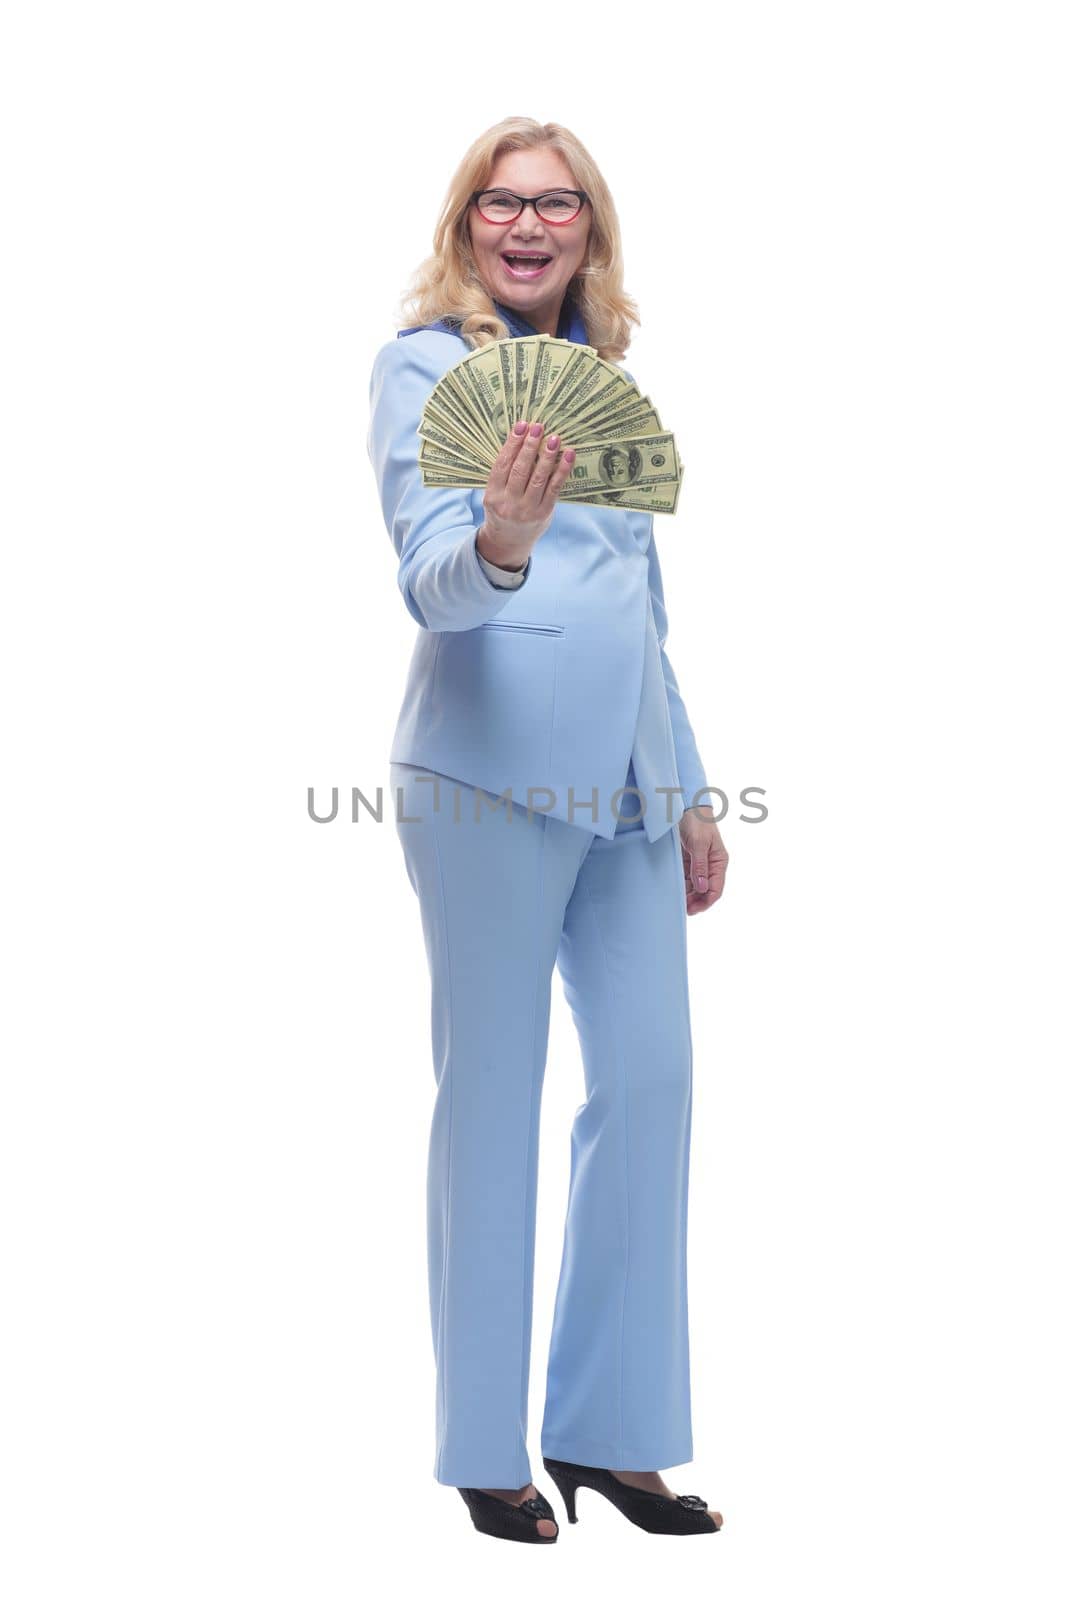 in full growth. smiling woman with a bundle of banknotes. by asdf